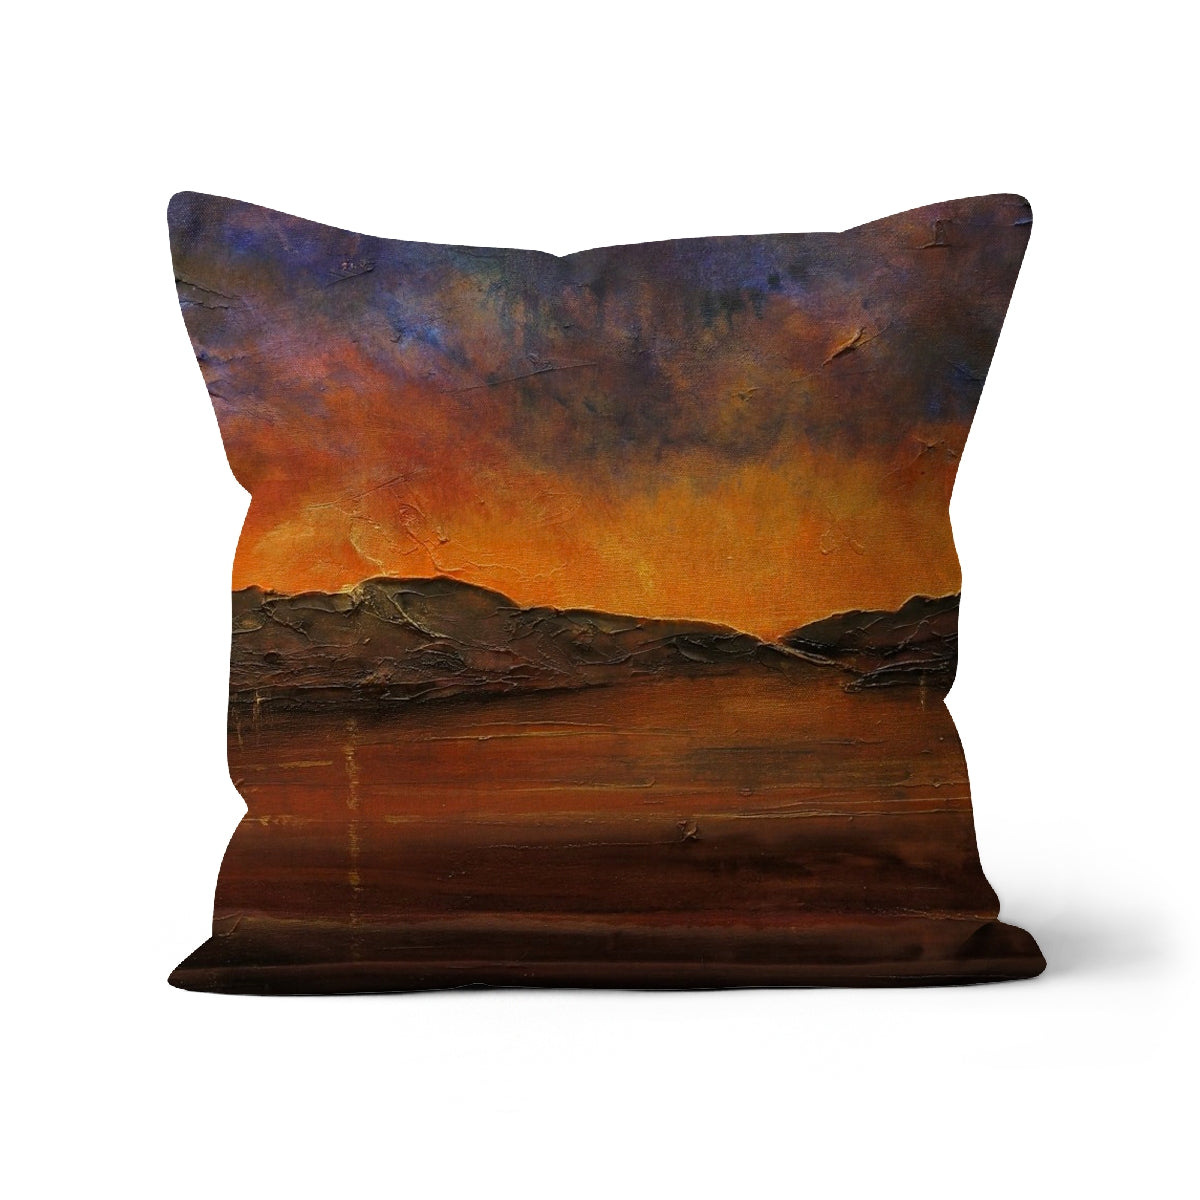 A Brooding Clyde Dusk Art Gifts Cushion-Cushions-River Clyde Art Gallery-Faux Suede-22"x22"-Paintings, Prints, Homeware, Art Gifts From Scotland By Scottish Artist Kevin Hunter